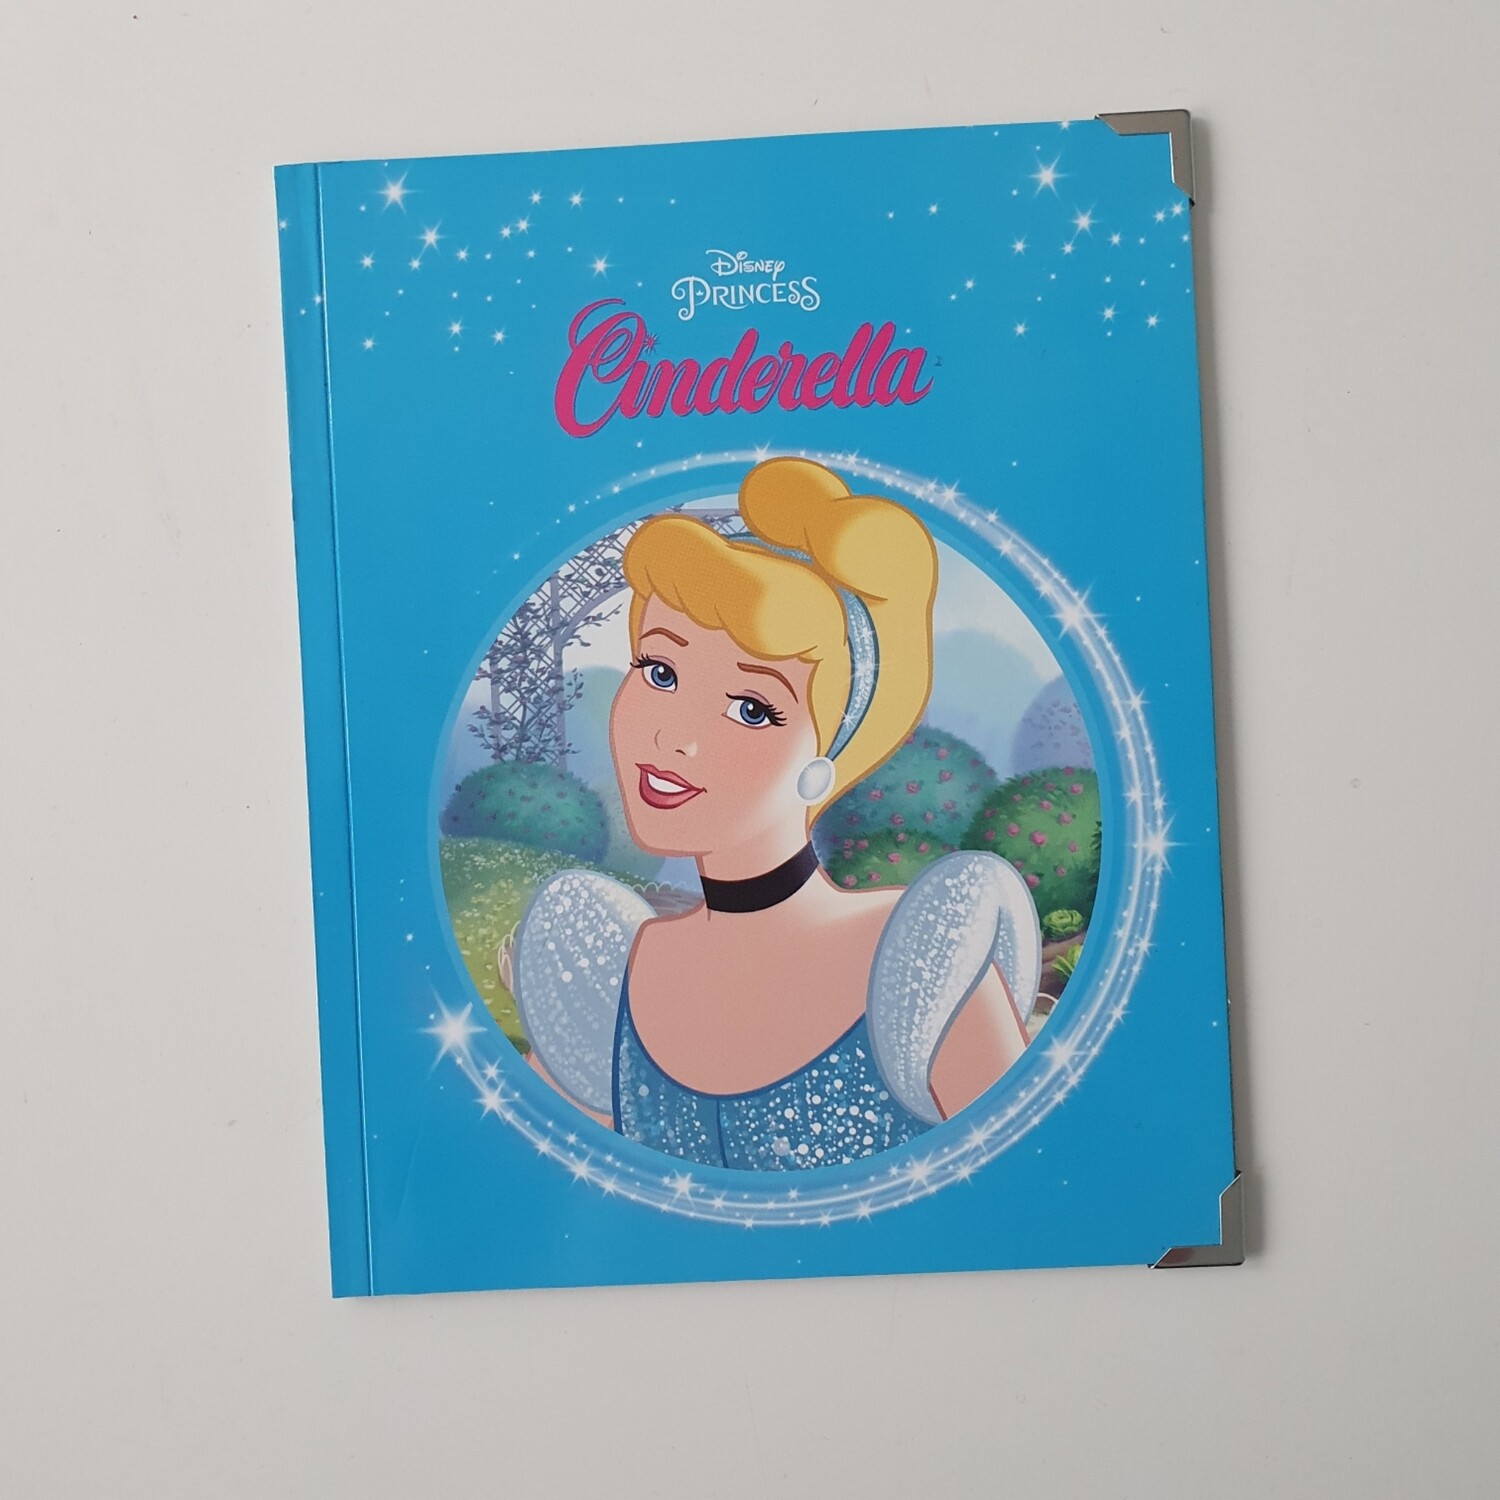 Cinderella Notebook - board book will come with metal book corners included